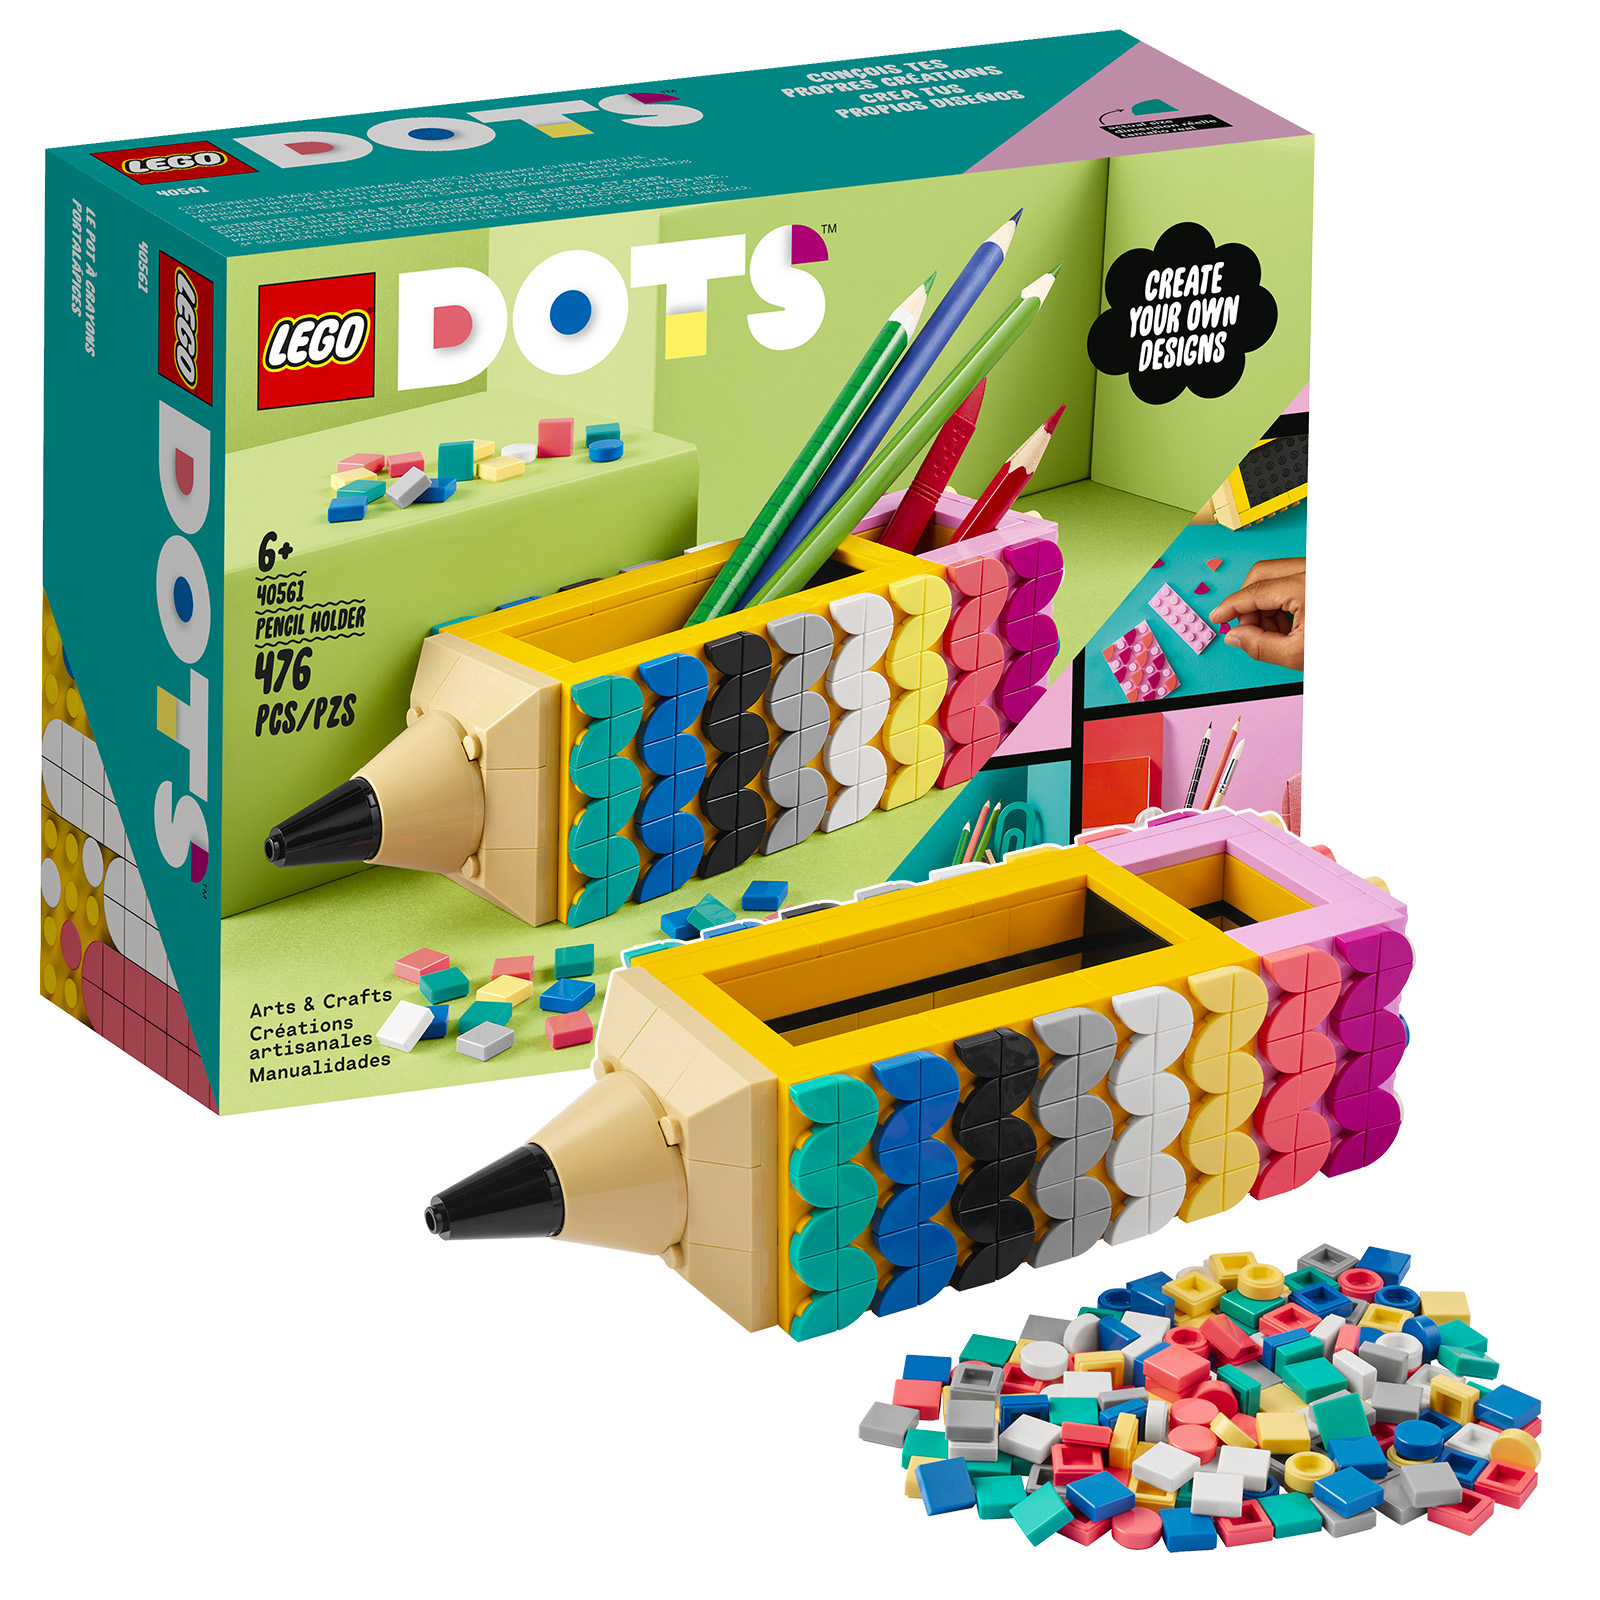 On the LEGO Shop: free DOTS 40561 Pencil Holder set and Super Mario 30509 Yellow Yoshi Fruit Tree polybag